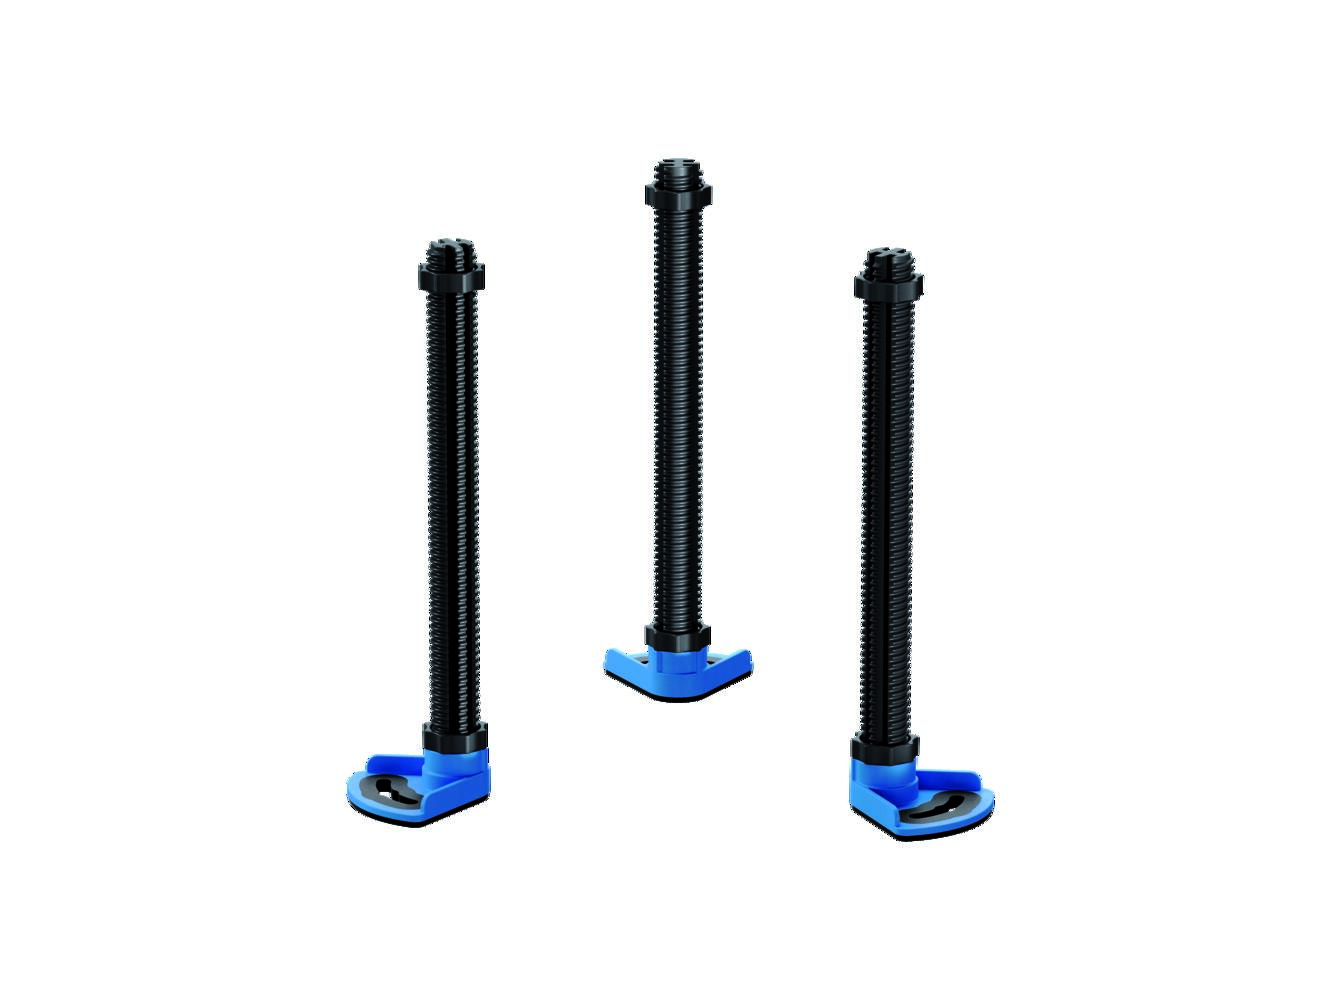 DallDrain mounting foot, height 236 mm, 3 pieces